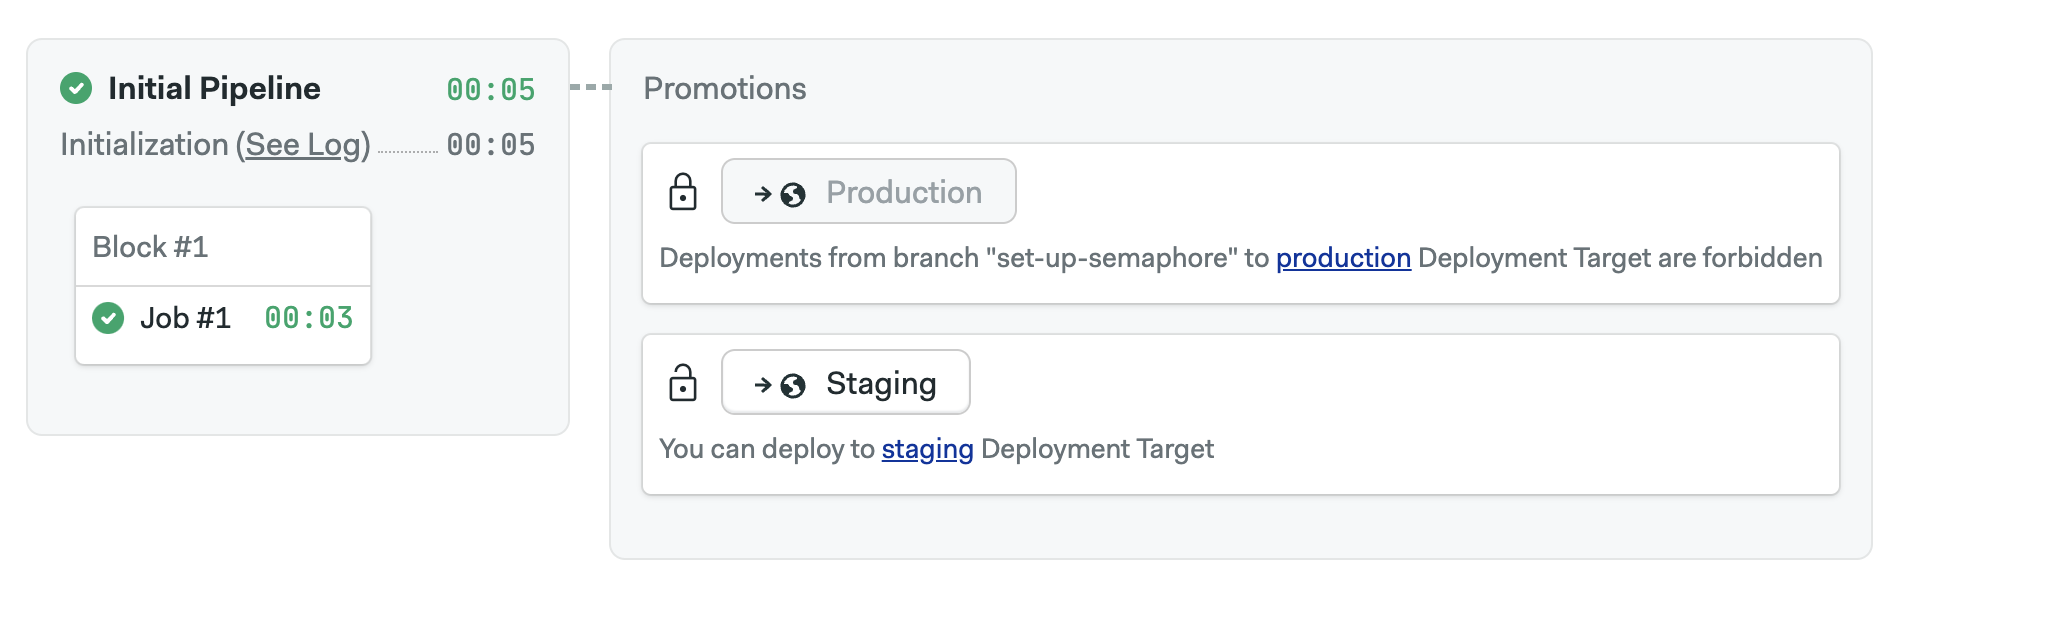 Workflow page with promotions secured by Deployment Targets